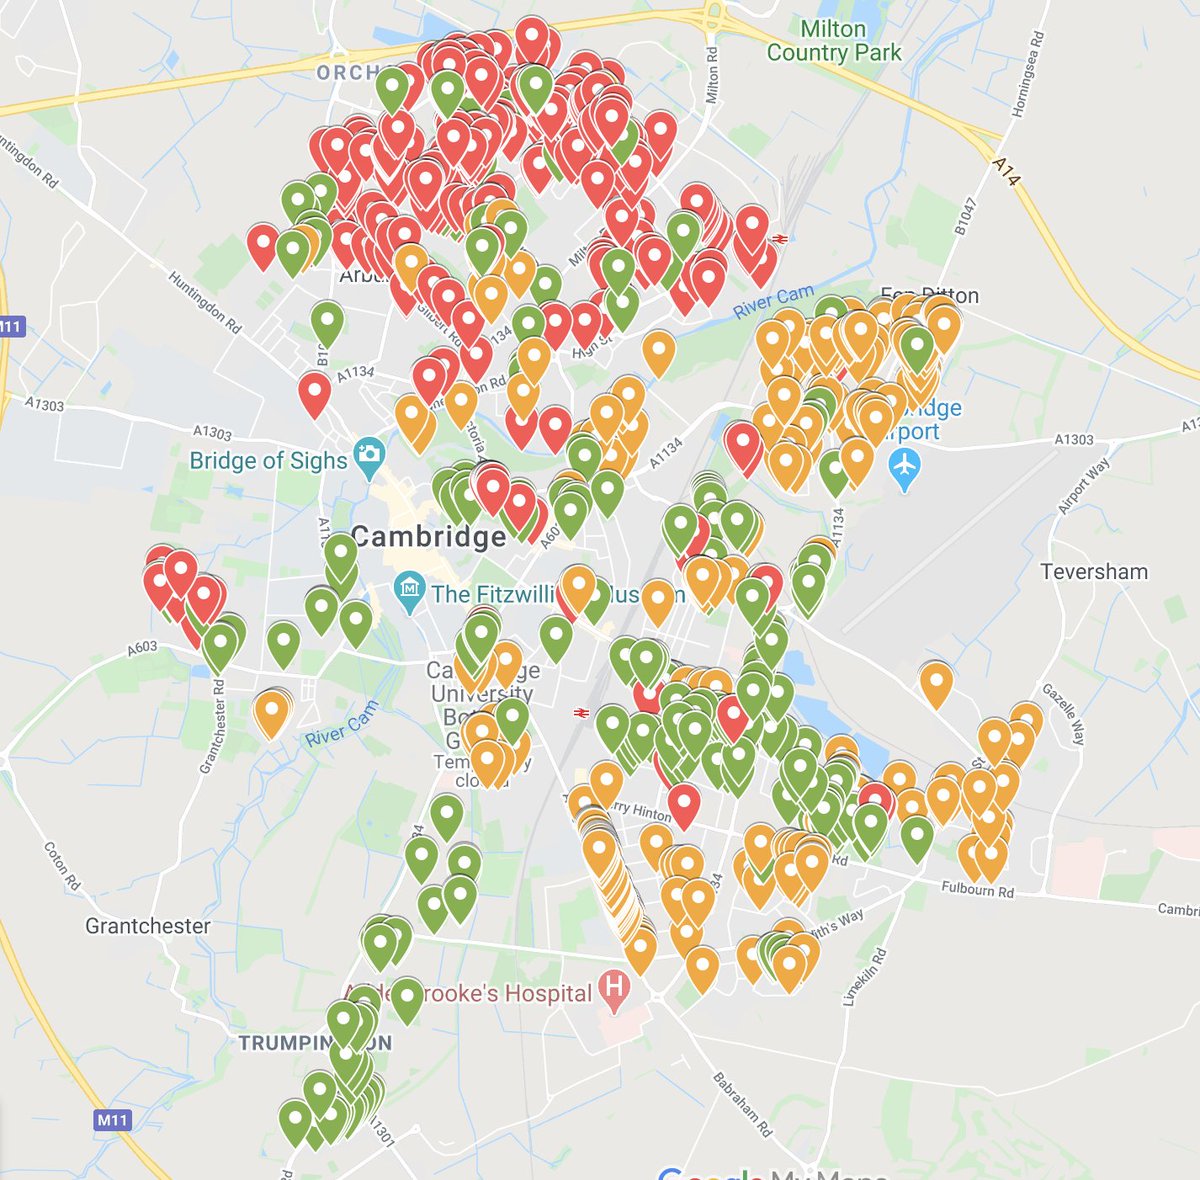 This is a map of trees that  @camcitco has planted recently in the city's parks and streets - red ones in the last few months. You can zoom into your neighbourhood at  https://www.google.com/maps/d/viewer?mid=1OZPNpZuMcvWDY7cs2KBeNtyu2mEx-5Ma&ll=52.20075019431591%2C0.15697876233389252&z=13